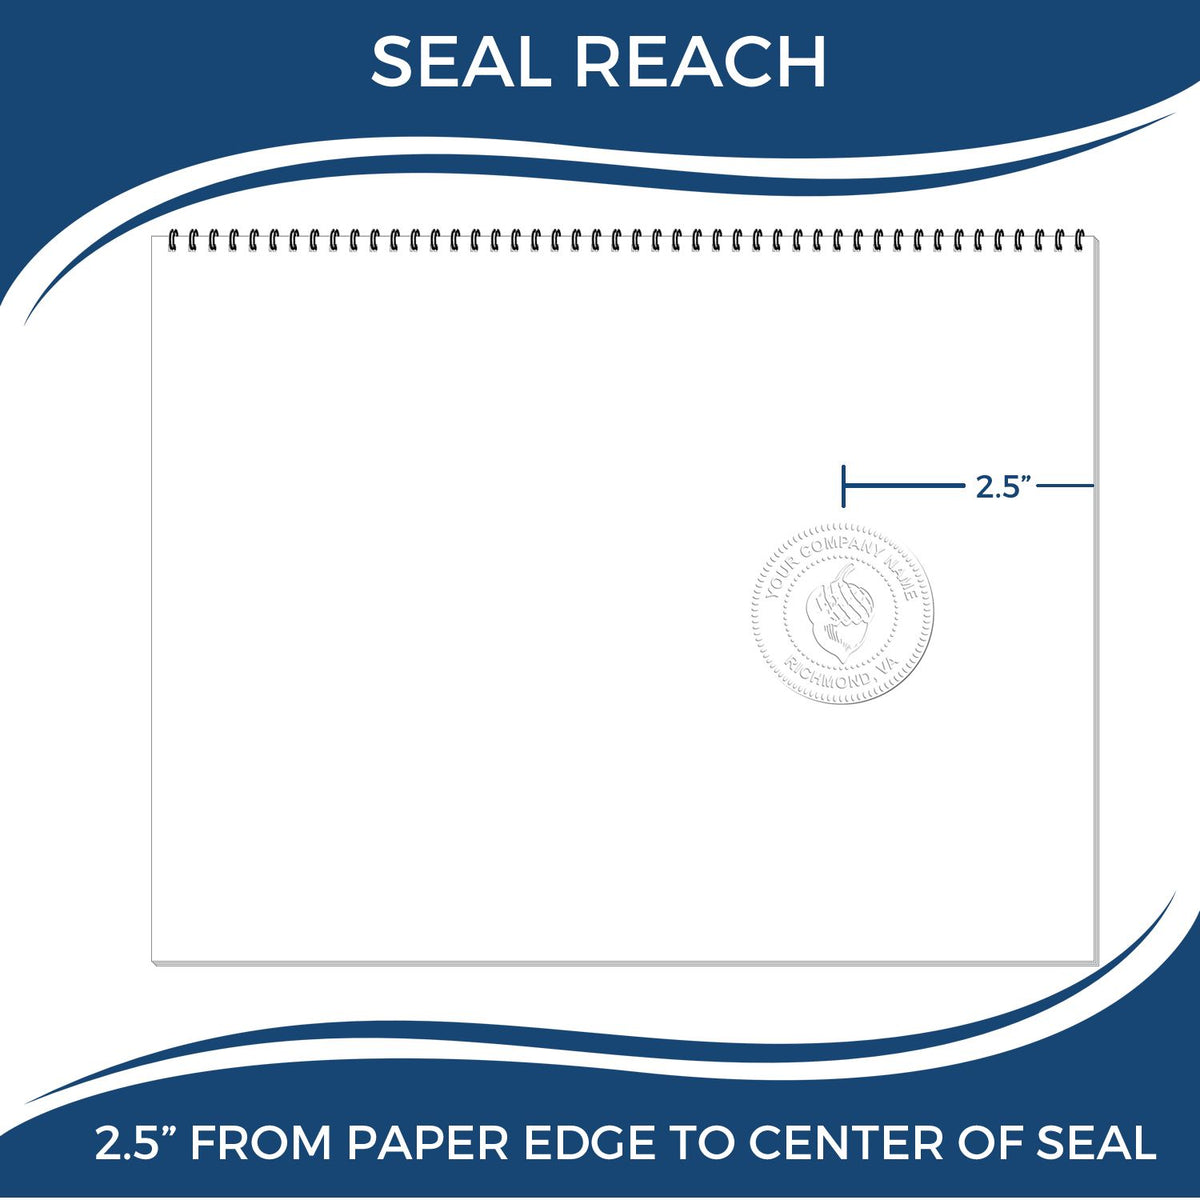 An infographic showing the seal reach which is represented by a ruler and a miniature seal image of the Heavy Duty Cast Iron Indiana Architect Embosser